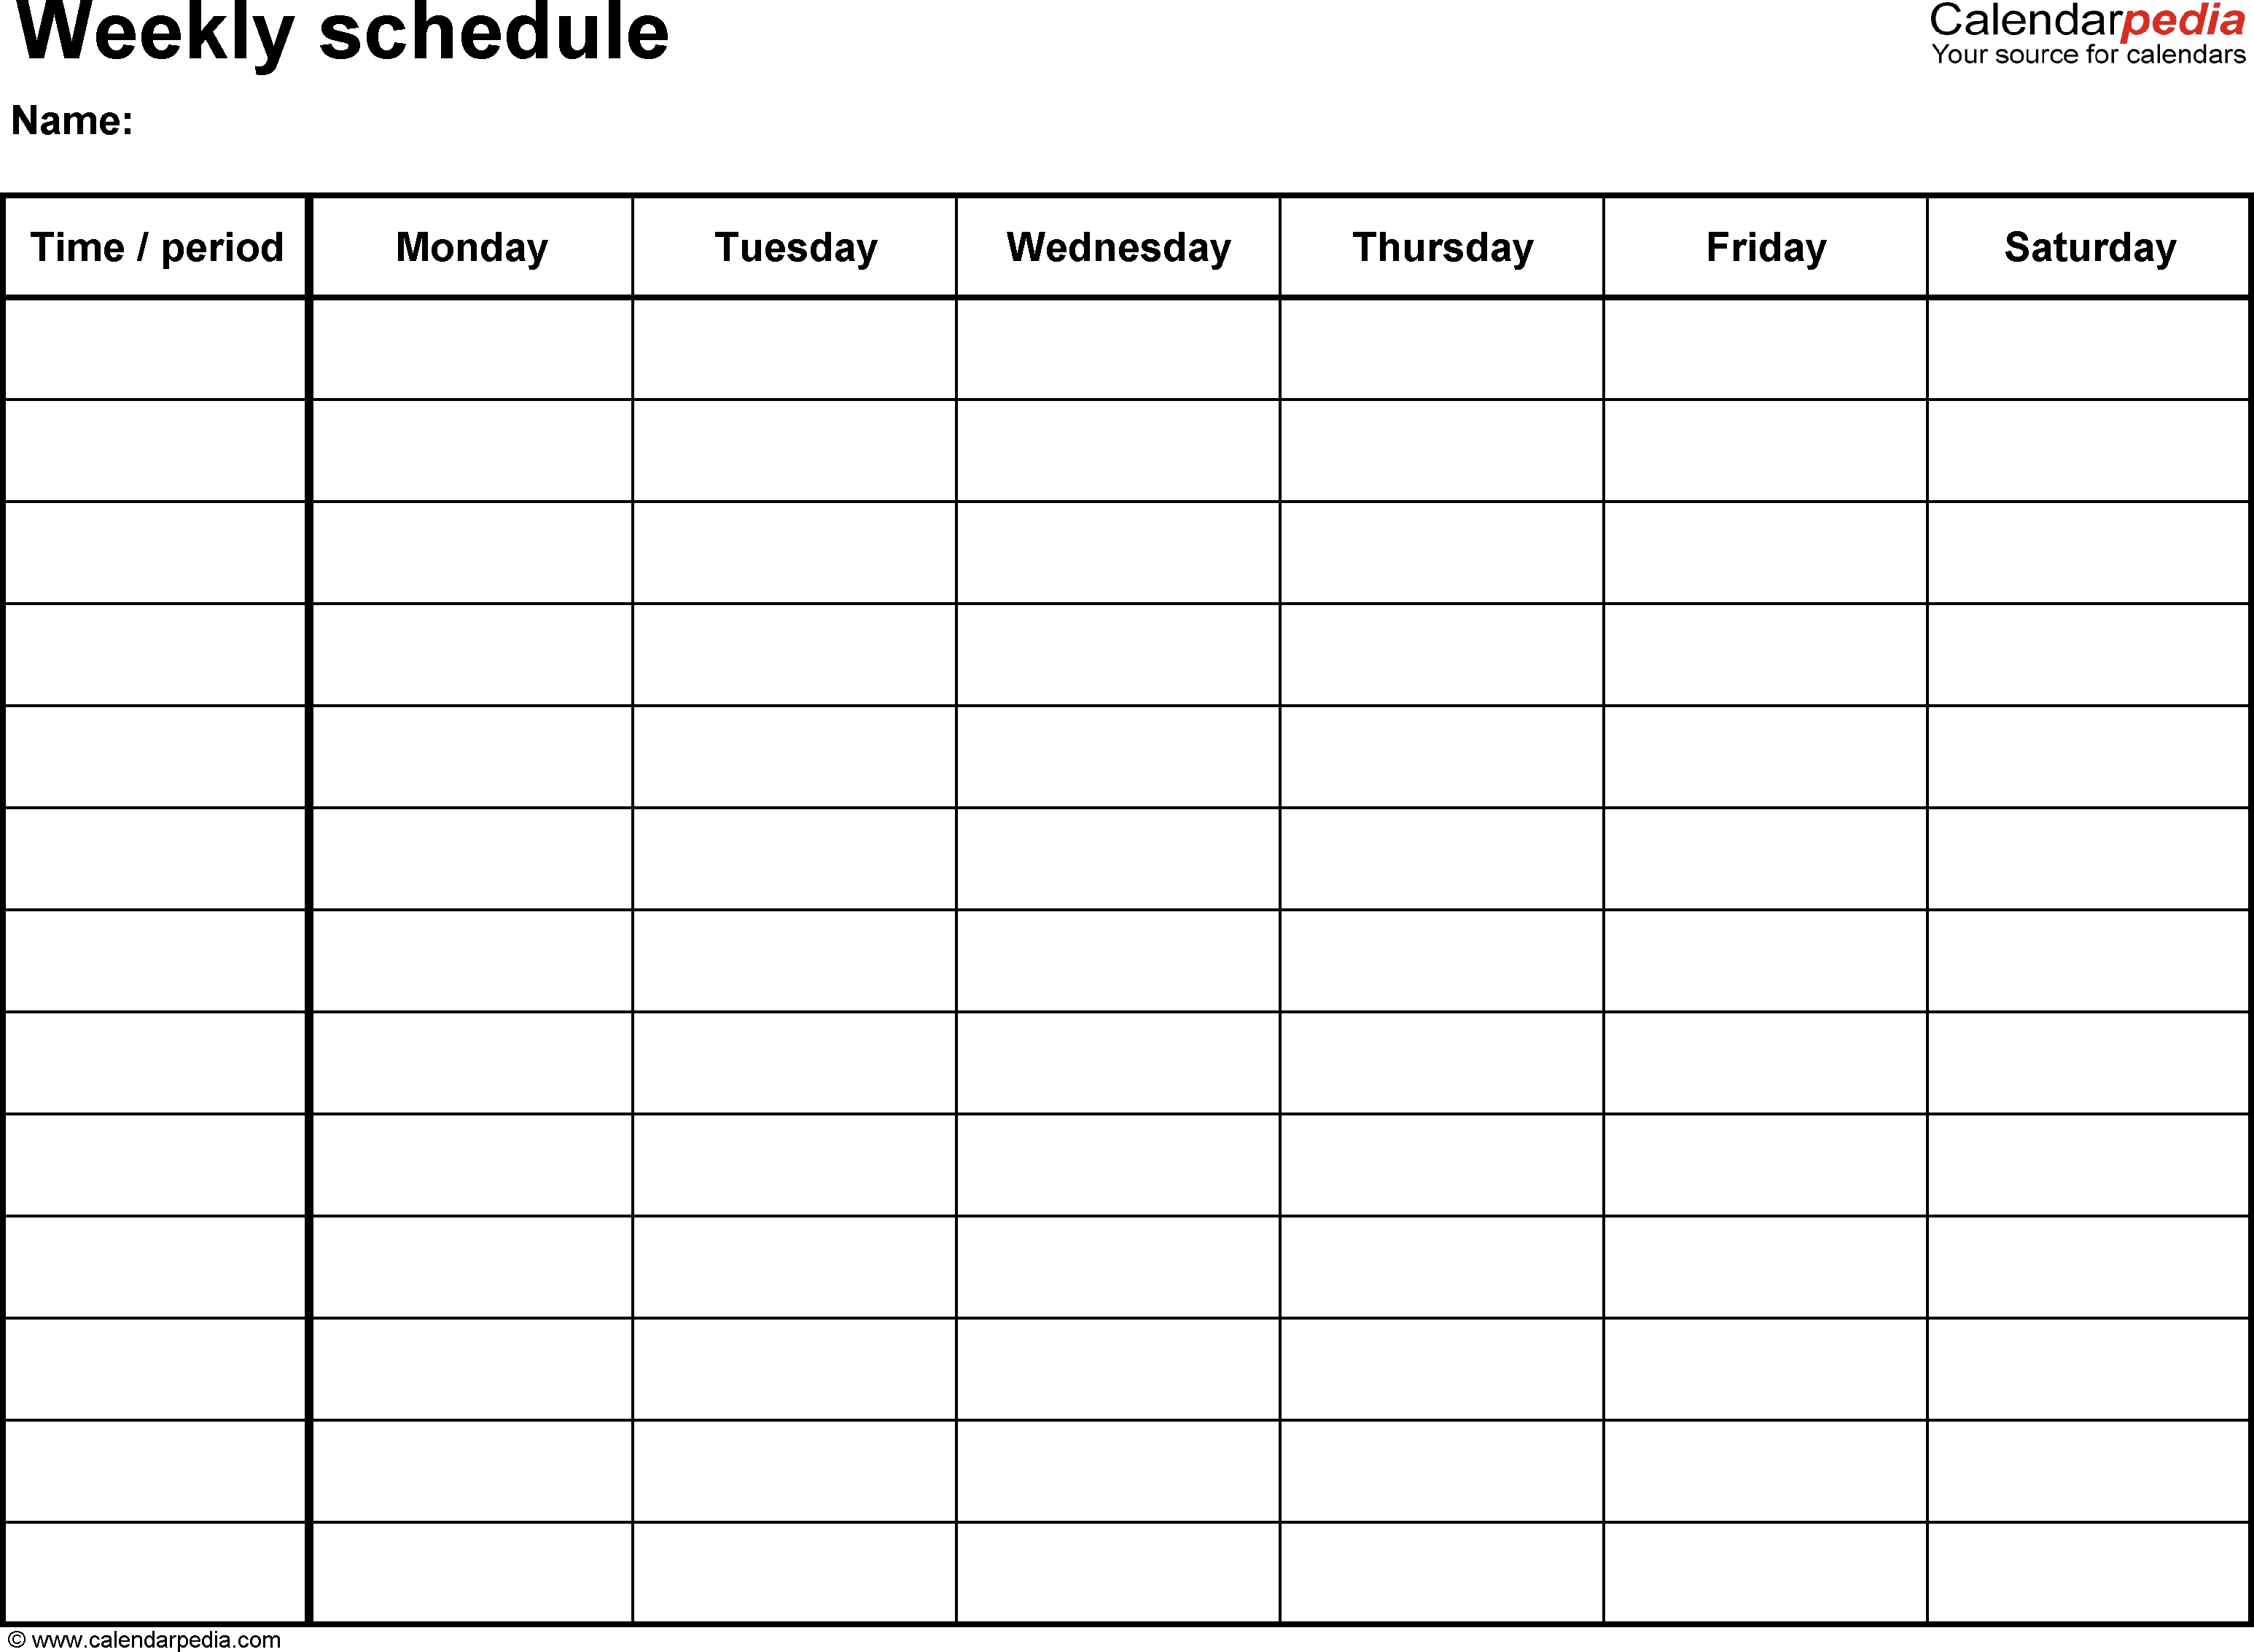 Free Weekly Schedule Templates For Excel - 18 Templates intended for Blank Calendar Printable With Times